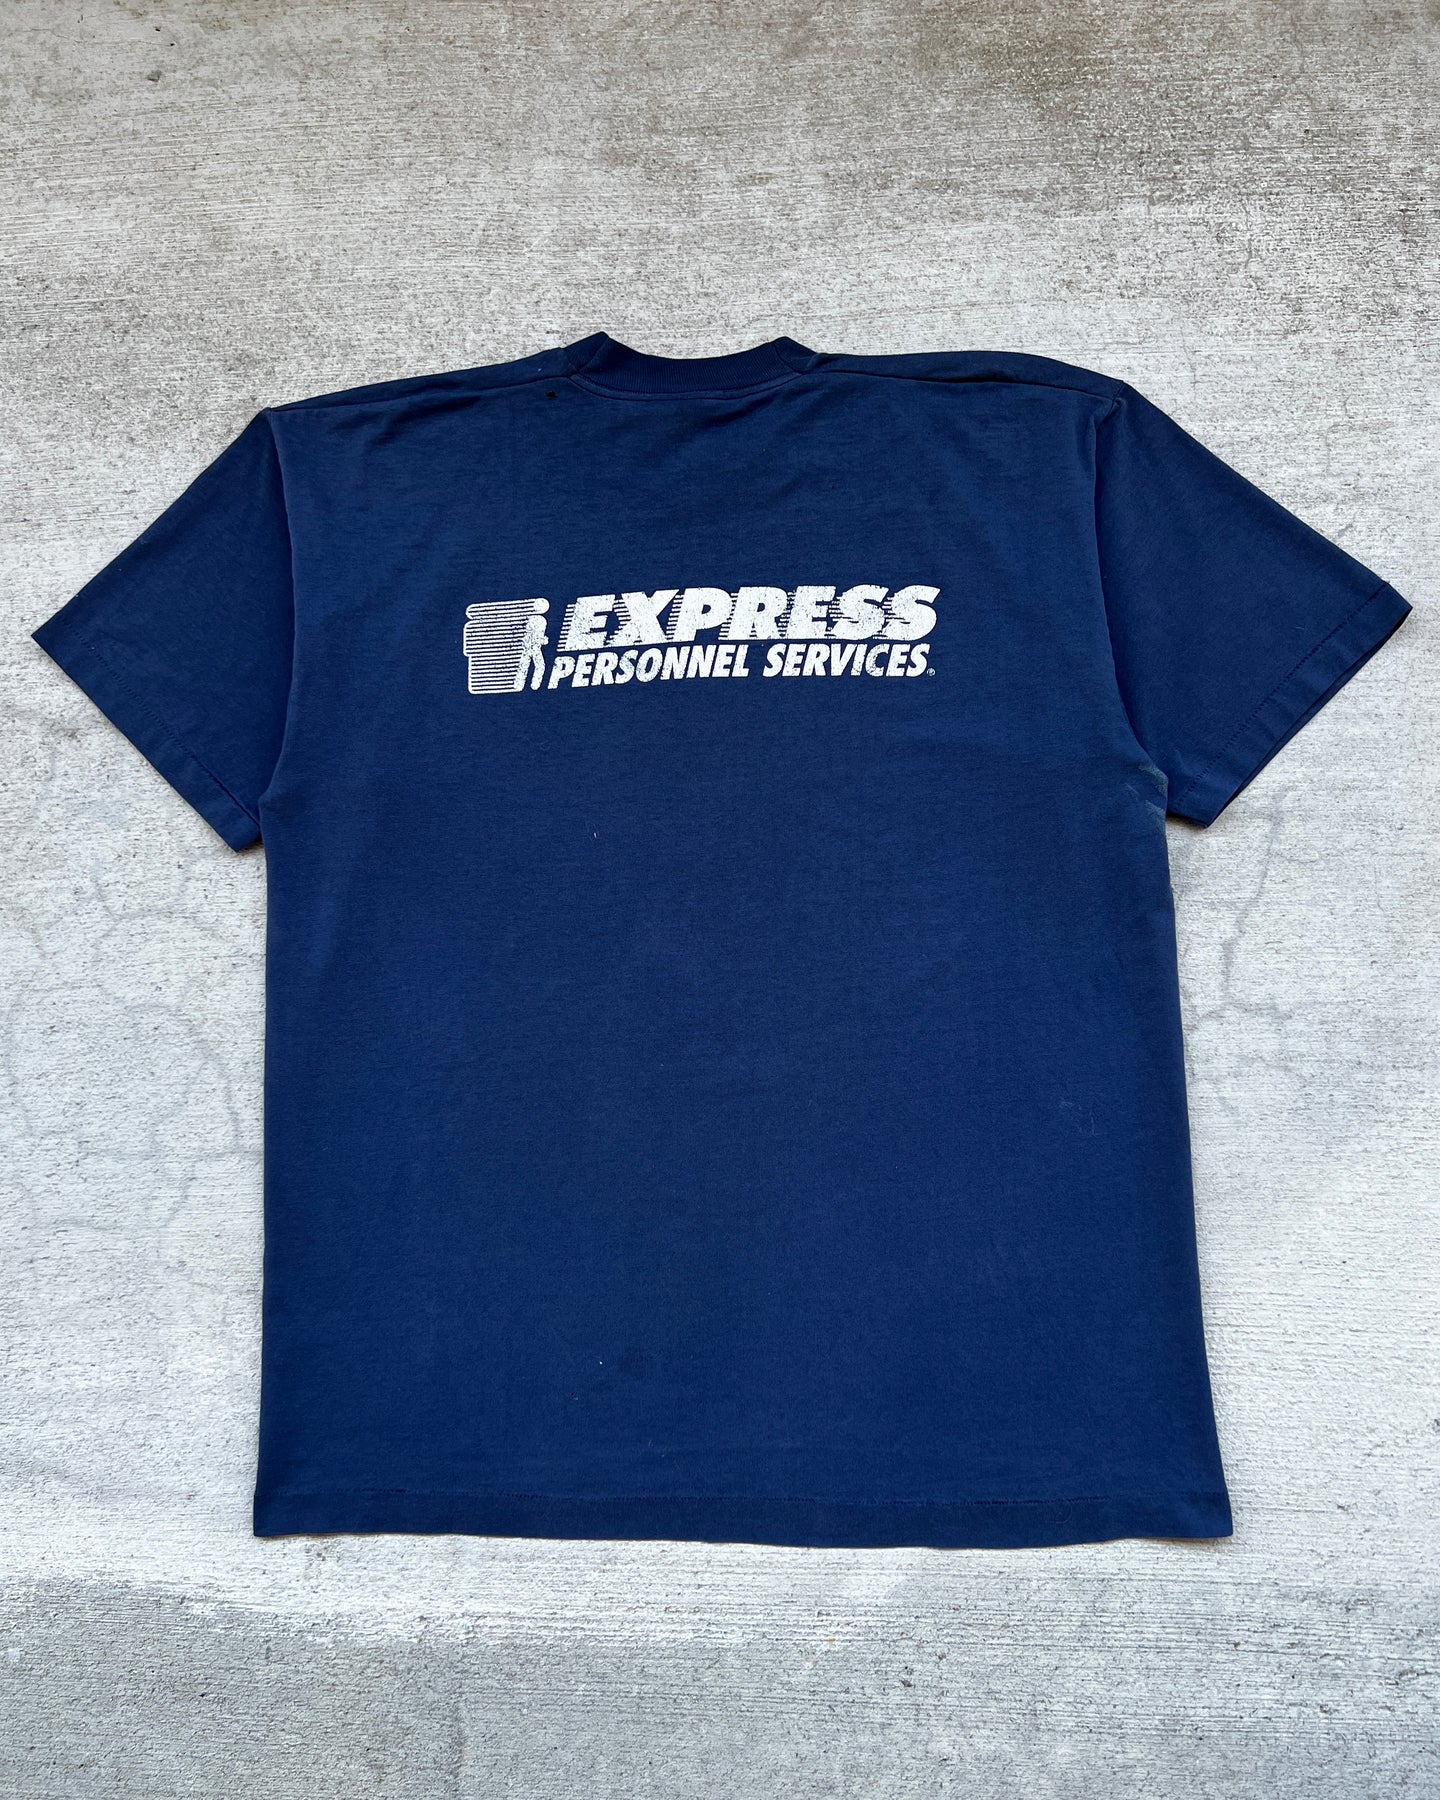 1990s Express Personnel Services Single Stitch Tee - Size X-Large